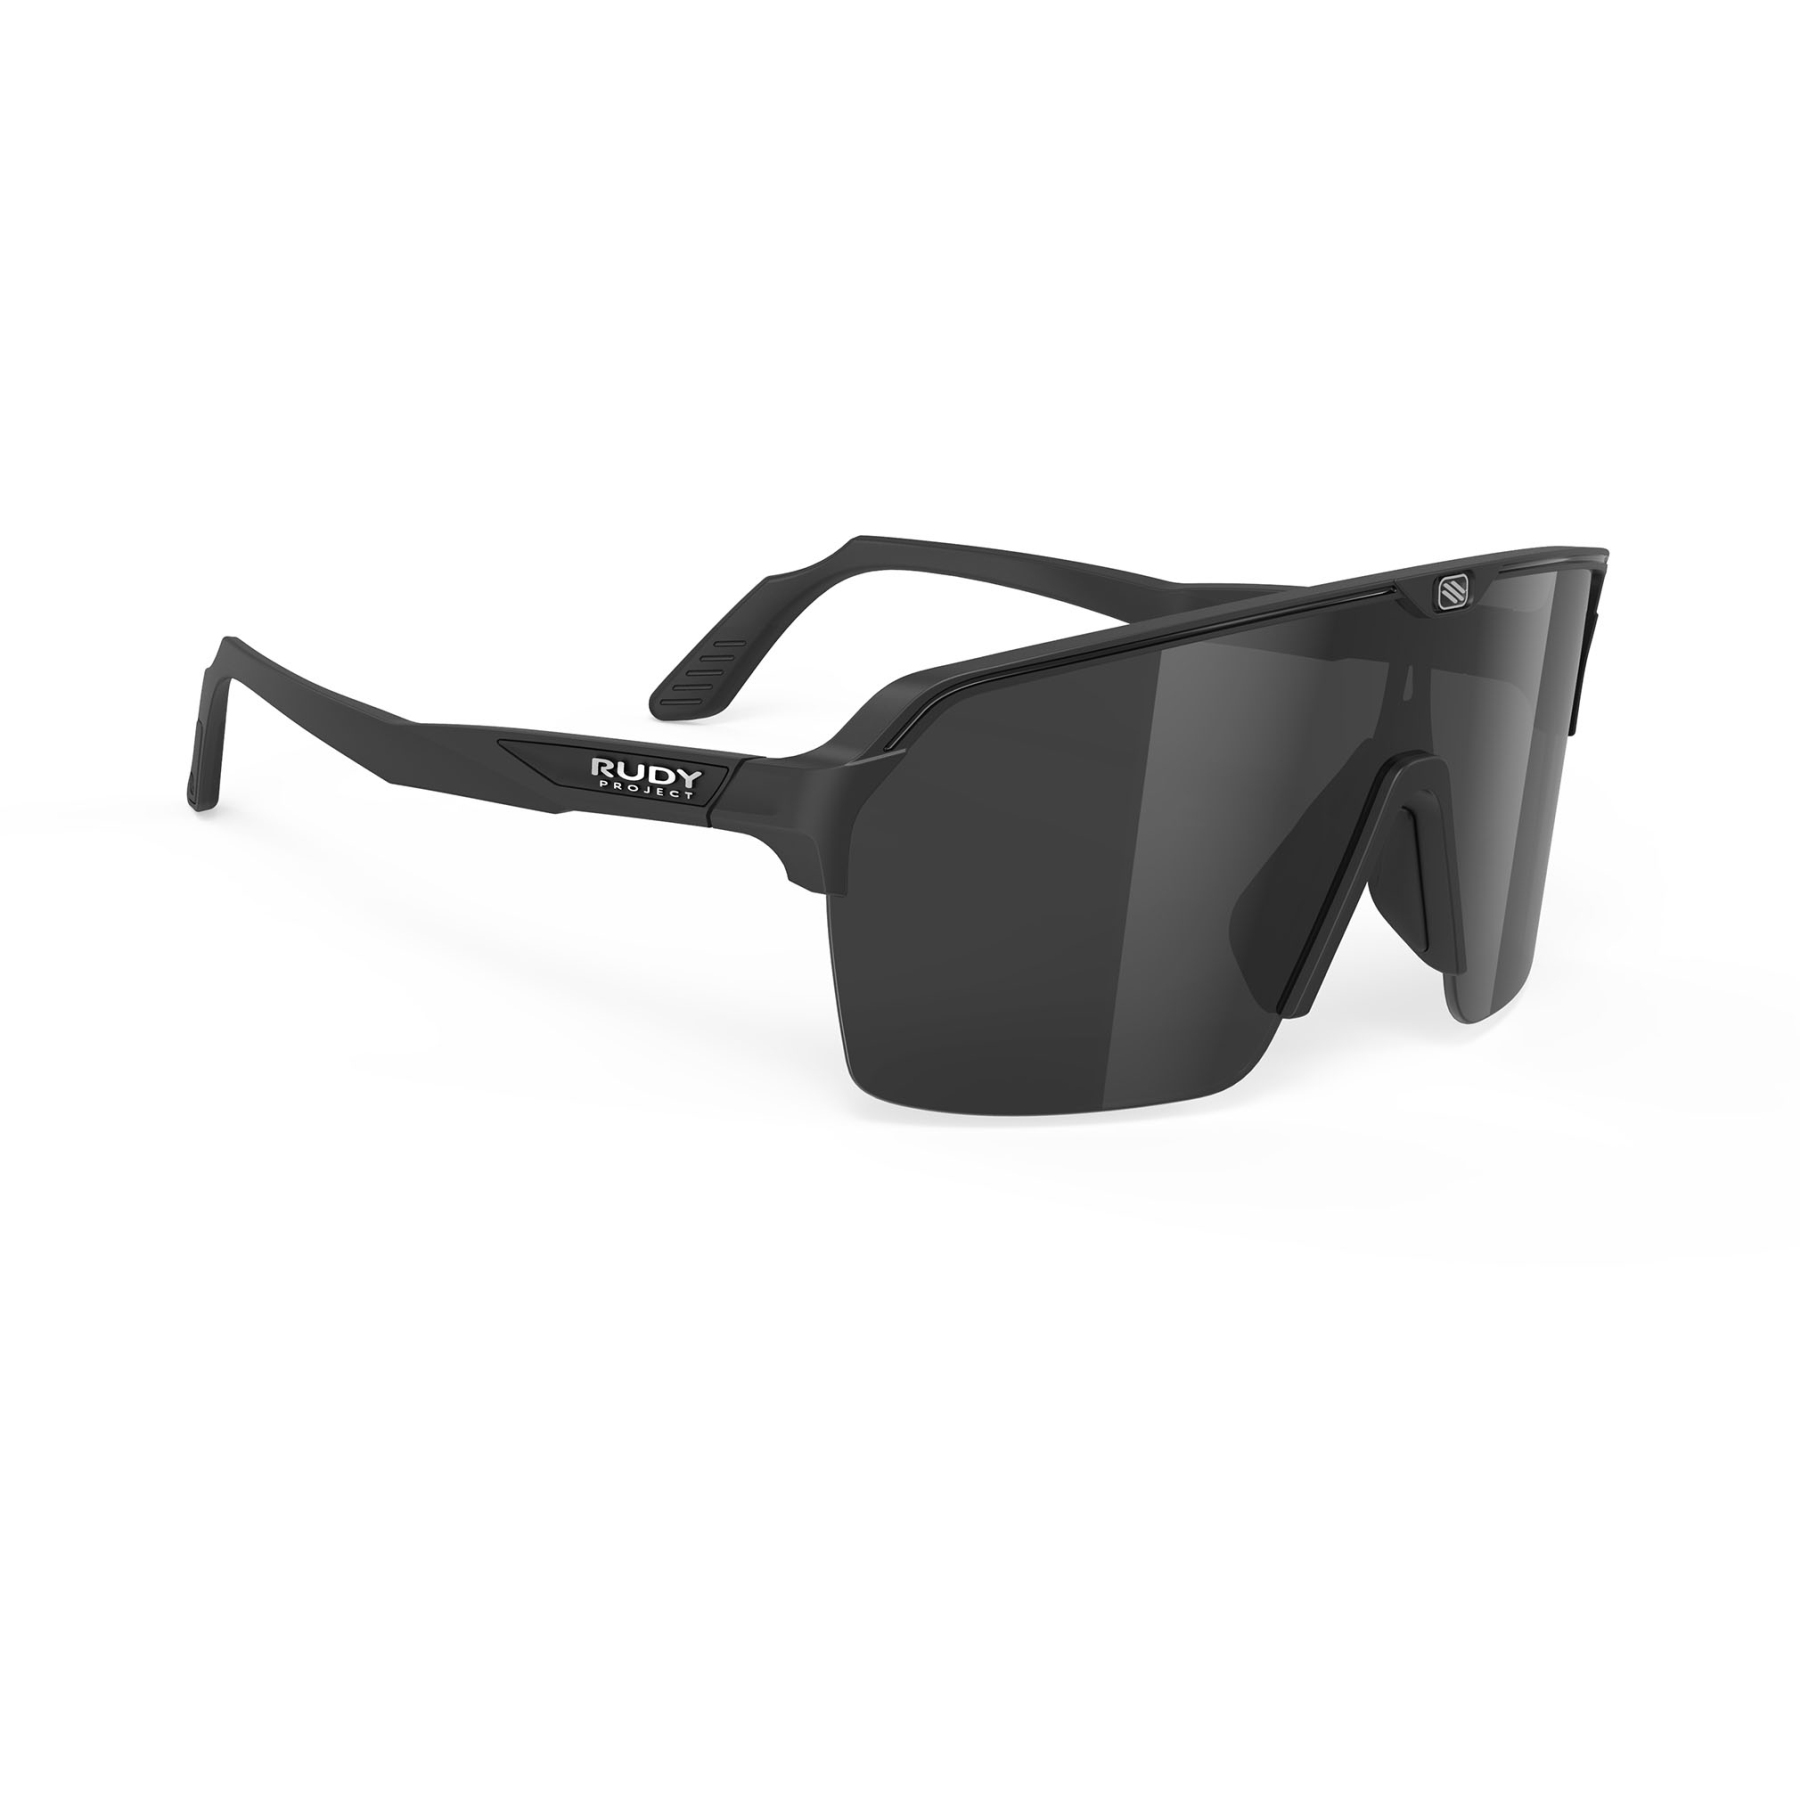 Picture of Rudy Project Spinshield Air Glasses - Black (Matte)/Smoke Black